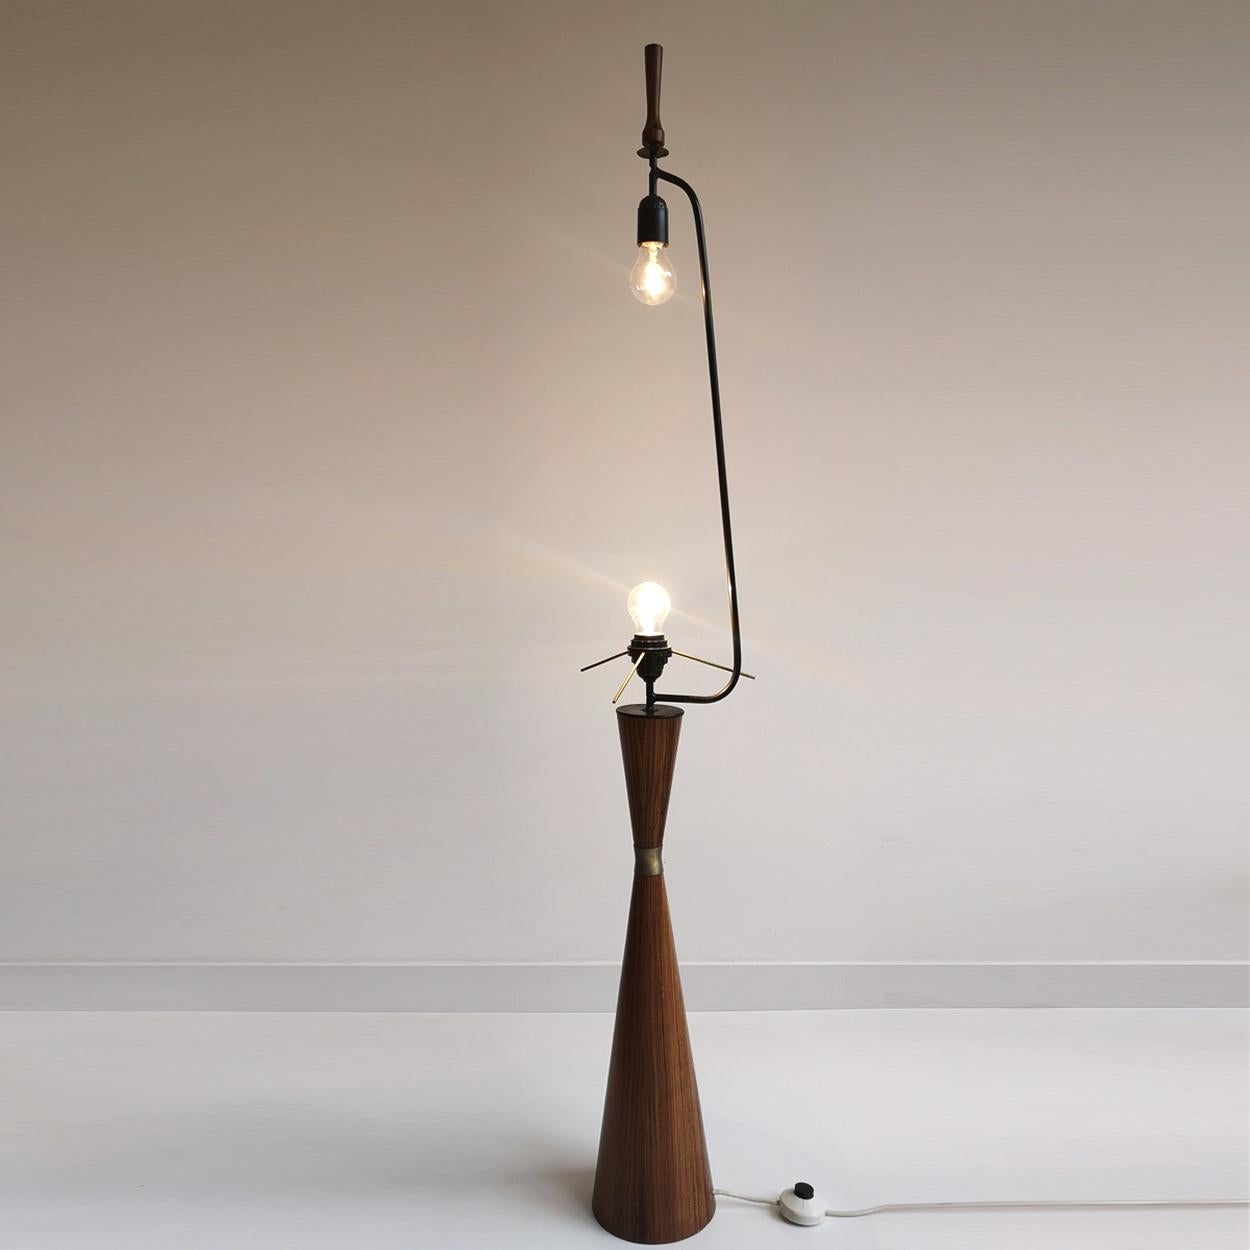 Mid-20th Century Danish Diabolo Floor Lamp with New Upholstered Lampshade, 1960s